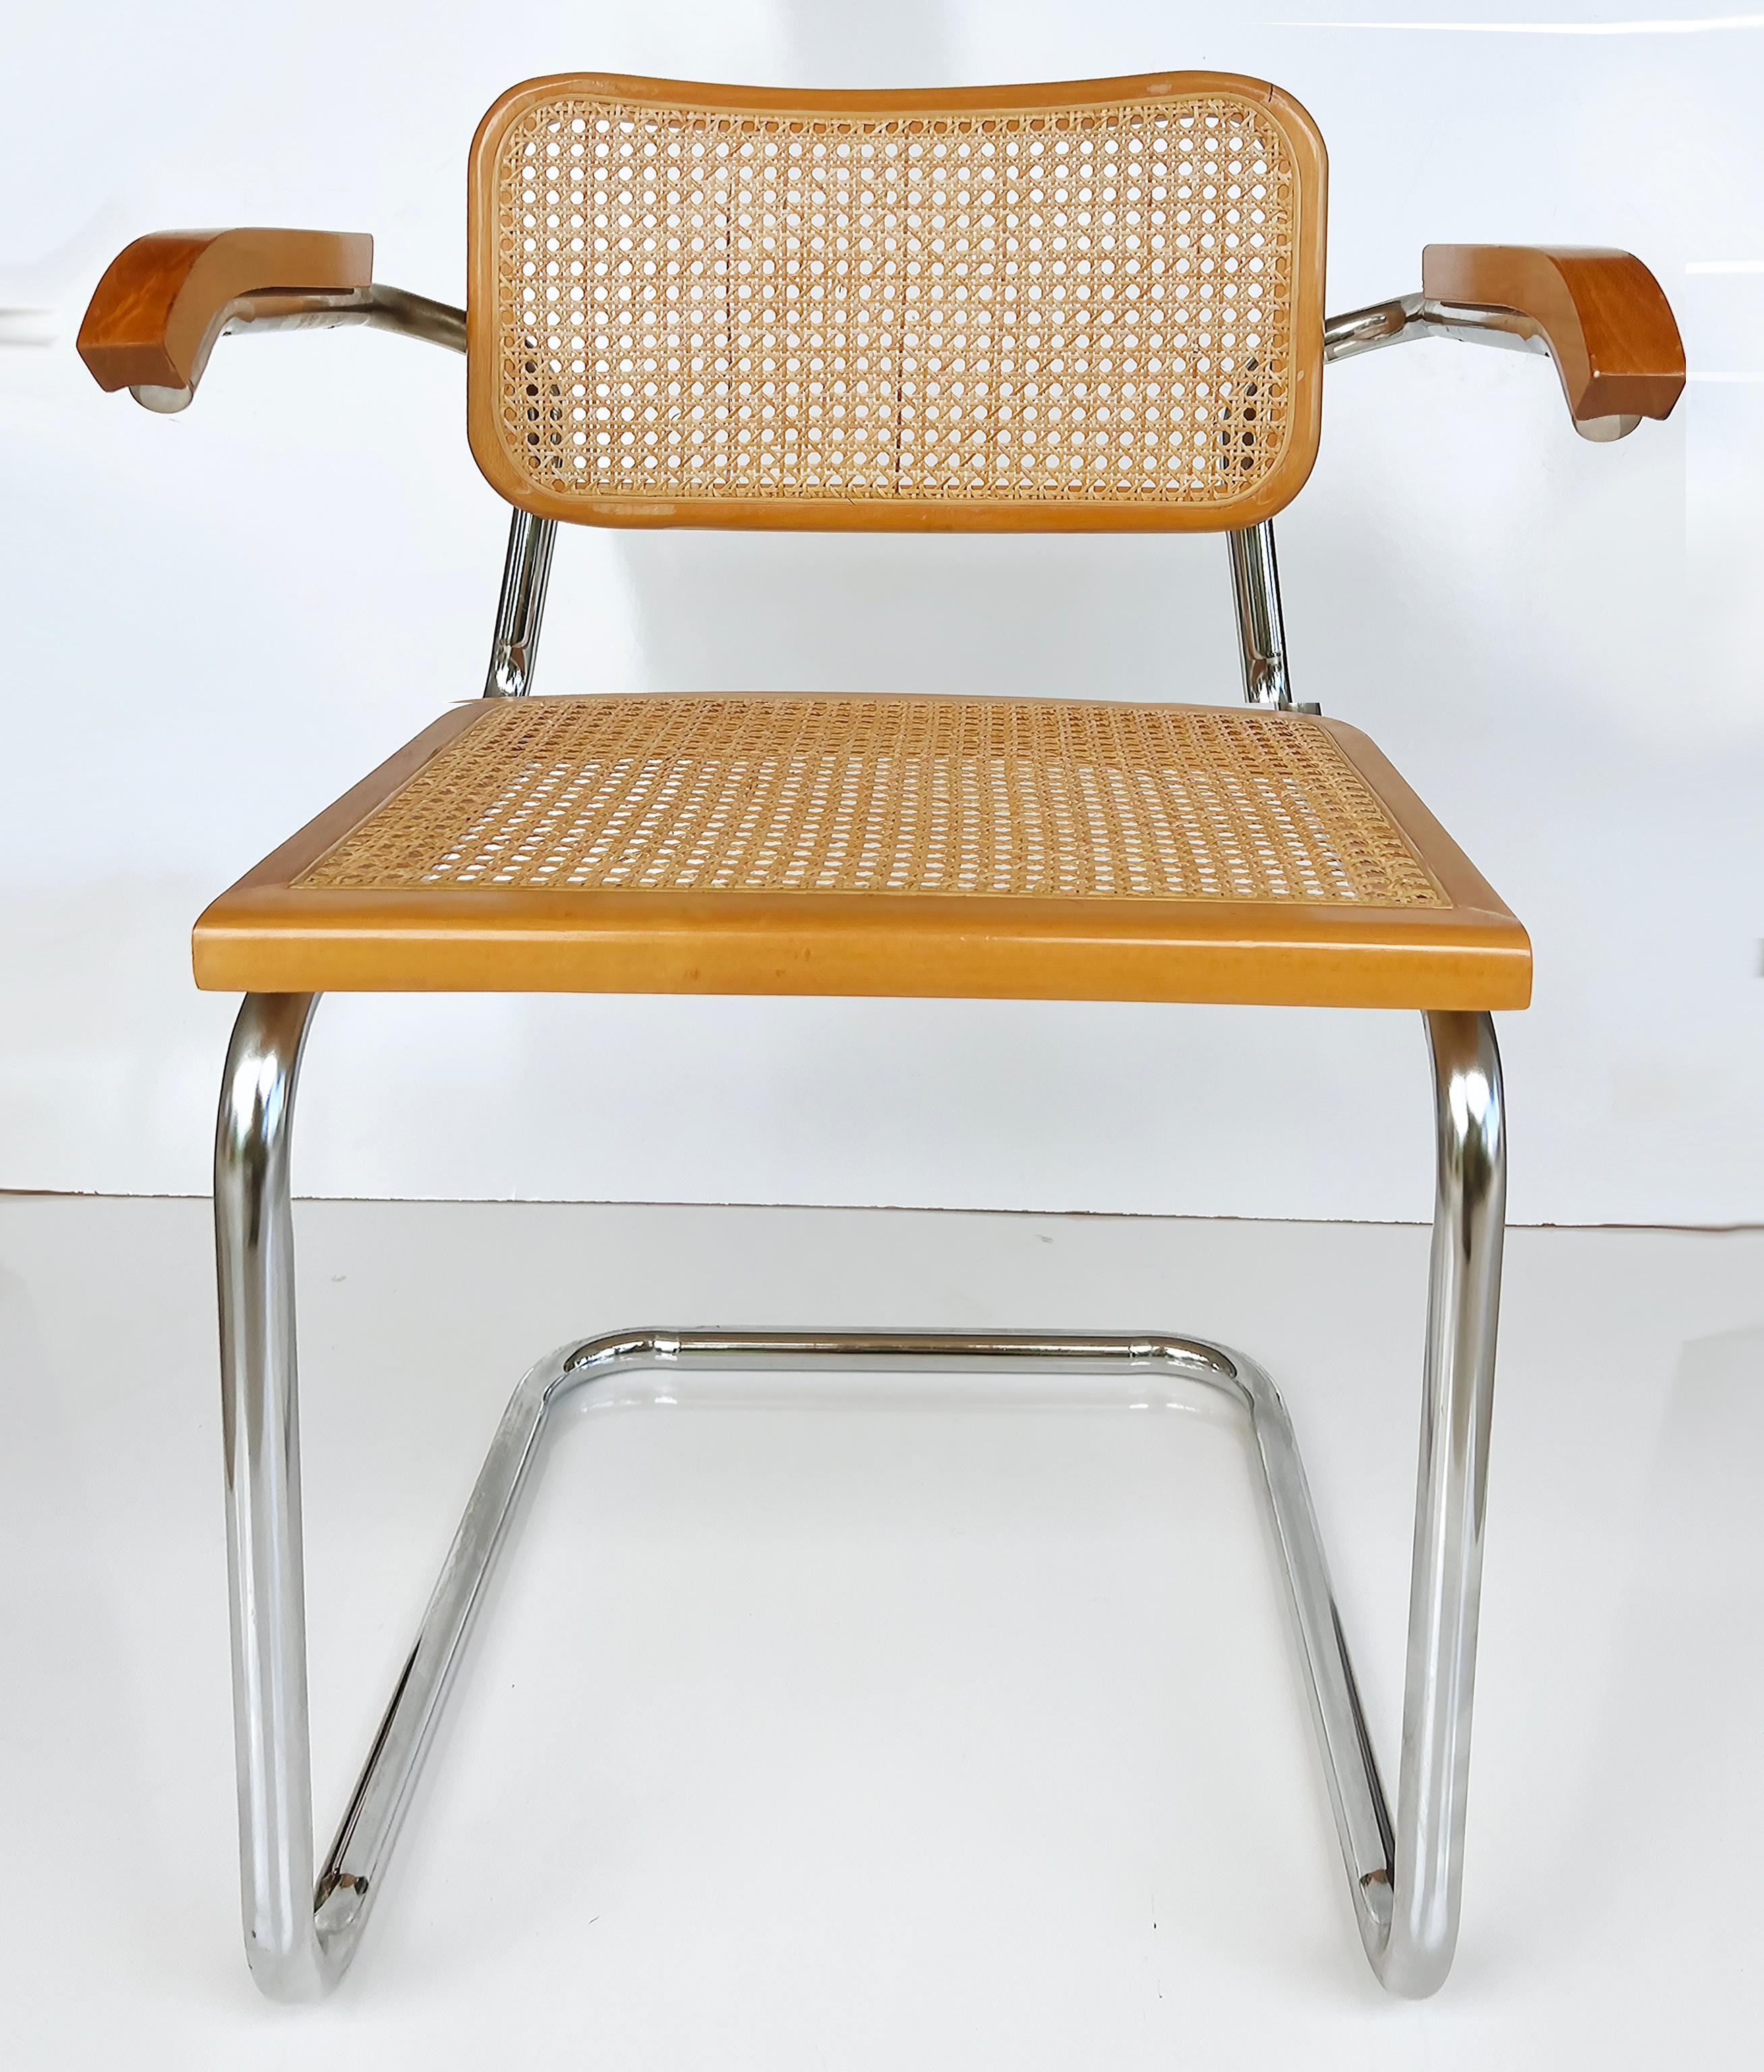 Set of 6 Vintage Cesca Dining Chairs by Marcel Breuer 

Offered for sale is s a set of 6 iconic vintage Cesca dining chairs by Marcel Breuer originally in the 1930s. The chairs are in very good vintage condition with Tubular-designed frames, The set